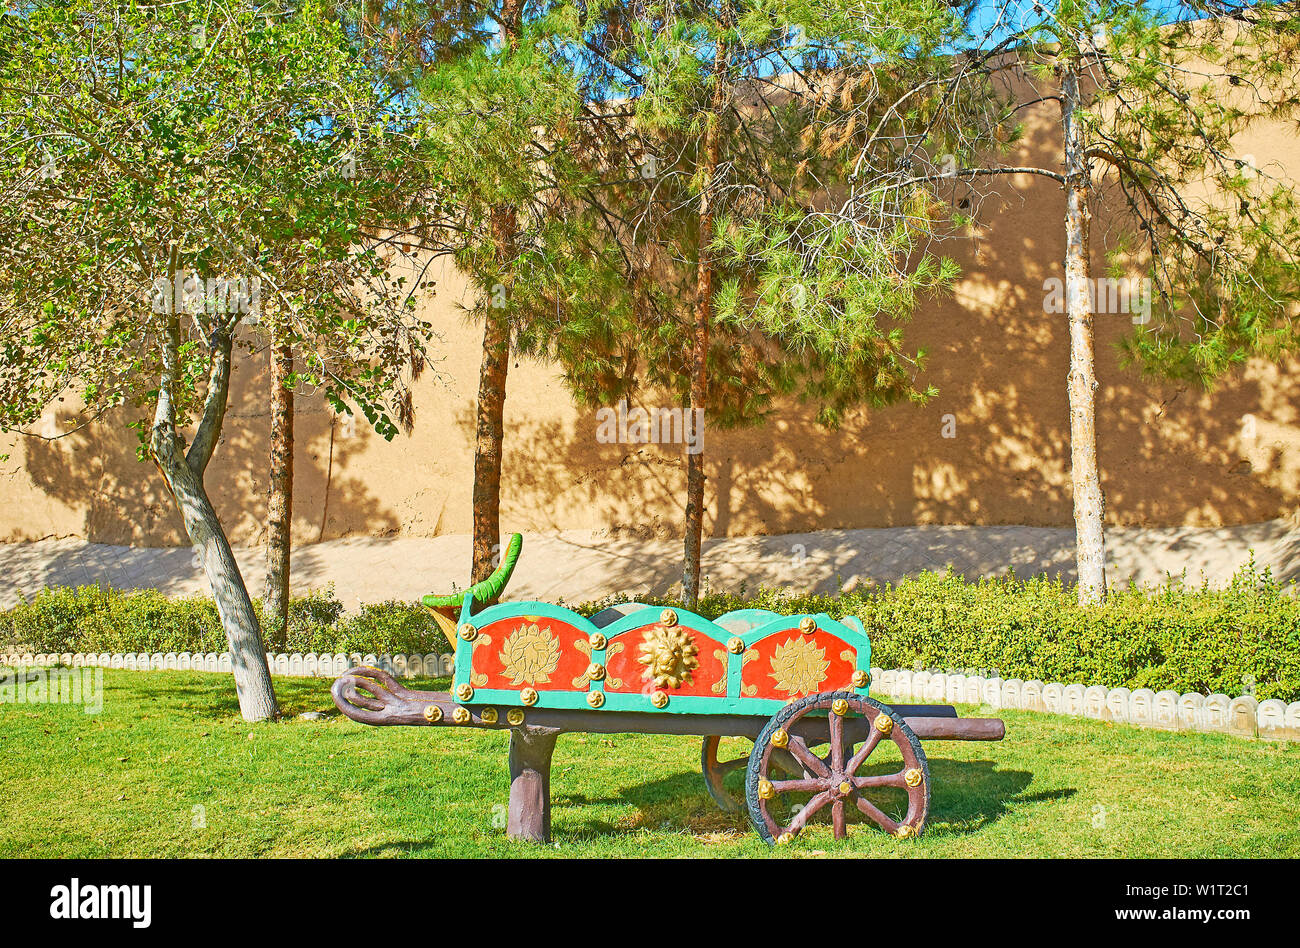 Watch the garden sculpture of old cart in green Mellat park, stretching along Ghal'eh Jalali fortress wall, Kashan, Iran Stock Photo